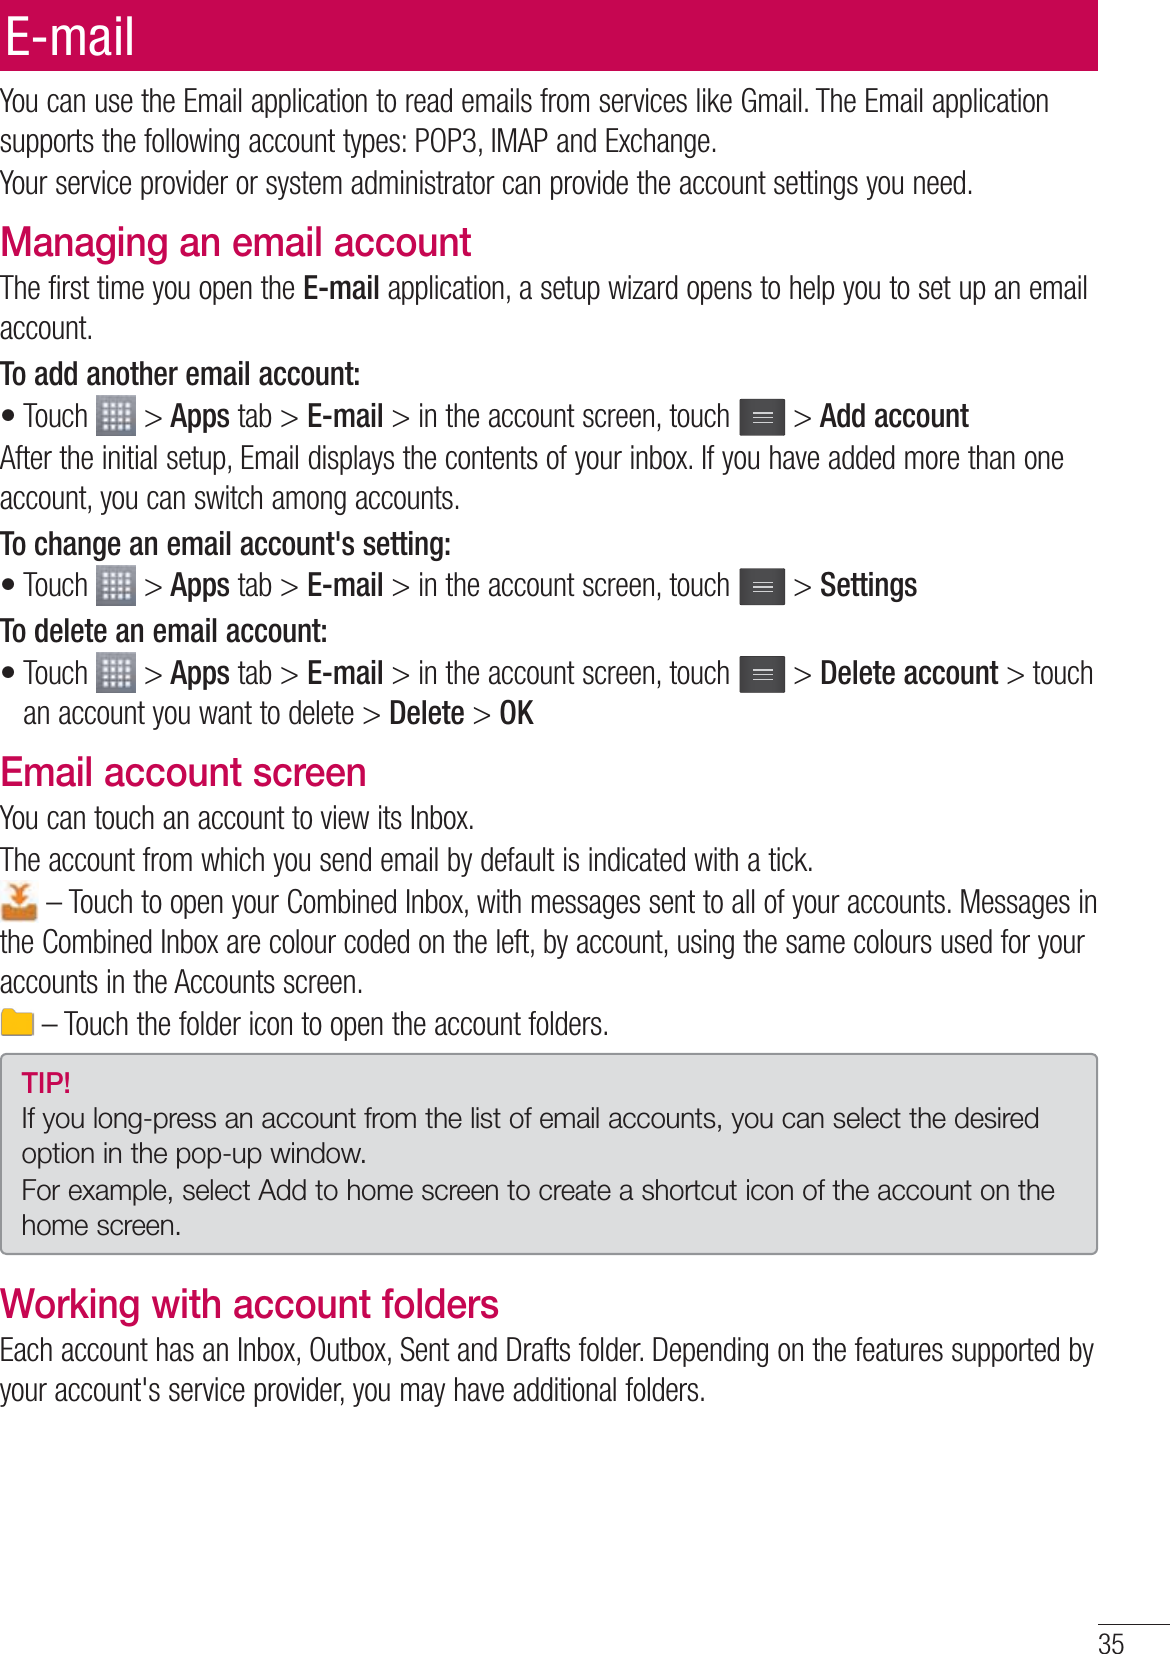 35You can use the Email application to read emails from services like Gmail. The Email application supports the following account types: POP3, IMAP and Exchange.Your service provider or system administrator can provide the account settings you need.Managing an email accountThe first time you open the E-mail application, a setup wizard opens to help you to set up an email account.To add another email account:Touch   &gt; Apps tab &gt; E-mail &gt; in the account screen, touch   &gt; Add accountAfter the initial setup, Email displays the contents of your inbox. If you have added more than one account, you can switch among accounts. To change an email account&apos;s setting:Touch   &gt; Apps tab &gt; E-mail &gt; in the account screen, touch   &gt; SettingsTo delete an email account:Touch   &gt; Apps tab &gt; E-mail &gt; in the account screen, touch   &gt; Delete account &gt; touch an account you want to delete &gt; Delete &gt; OKEmail account screenYou can touch an account to view its Inbox.The account from which you send email by default is indicated with a tick. – Touch to open your Combined Inbox, with messages sent to all of your accounts. Messages in the Combined Inbox are colour coded on the left, by account, using the same colours used for your accounts in the Accounts screen. – Touch the folder icon to open the account folders.TIP! If you long-press an account from the list of email accounts, you can select the desired option in the pop-up window.For example, select Add to home screen to create a shortcut icon of the account on the home screen.Working with account foldersEach account has an Inbox, Outbox, Sent and Drafts folder. Depending on the features supported by your account&apos;s service provider, you may have additional folders.•••E-mail